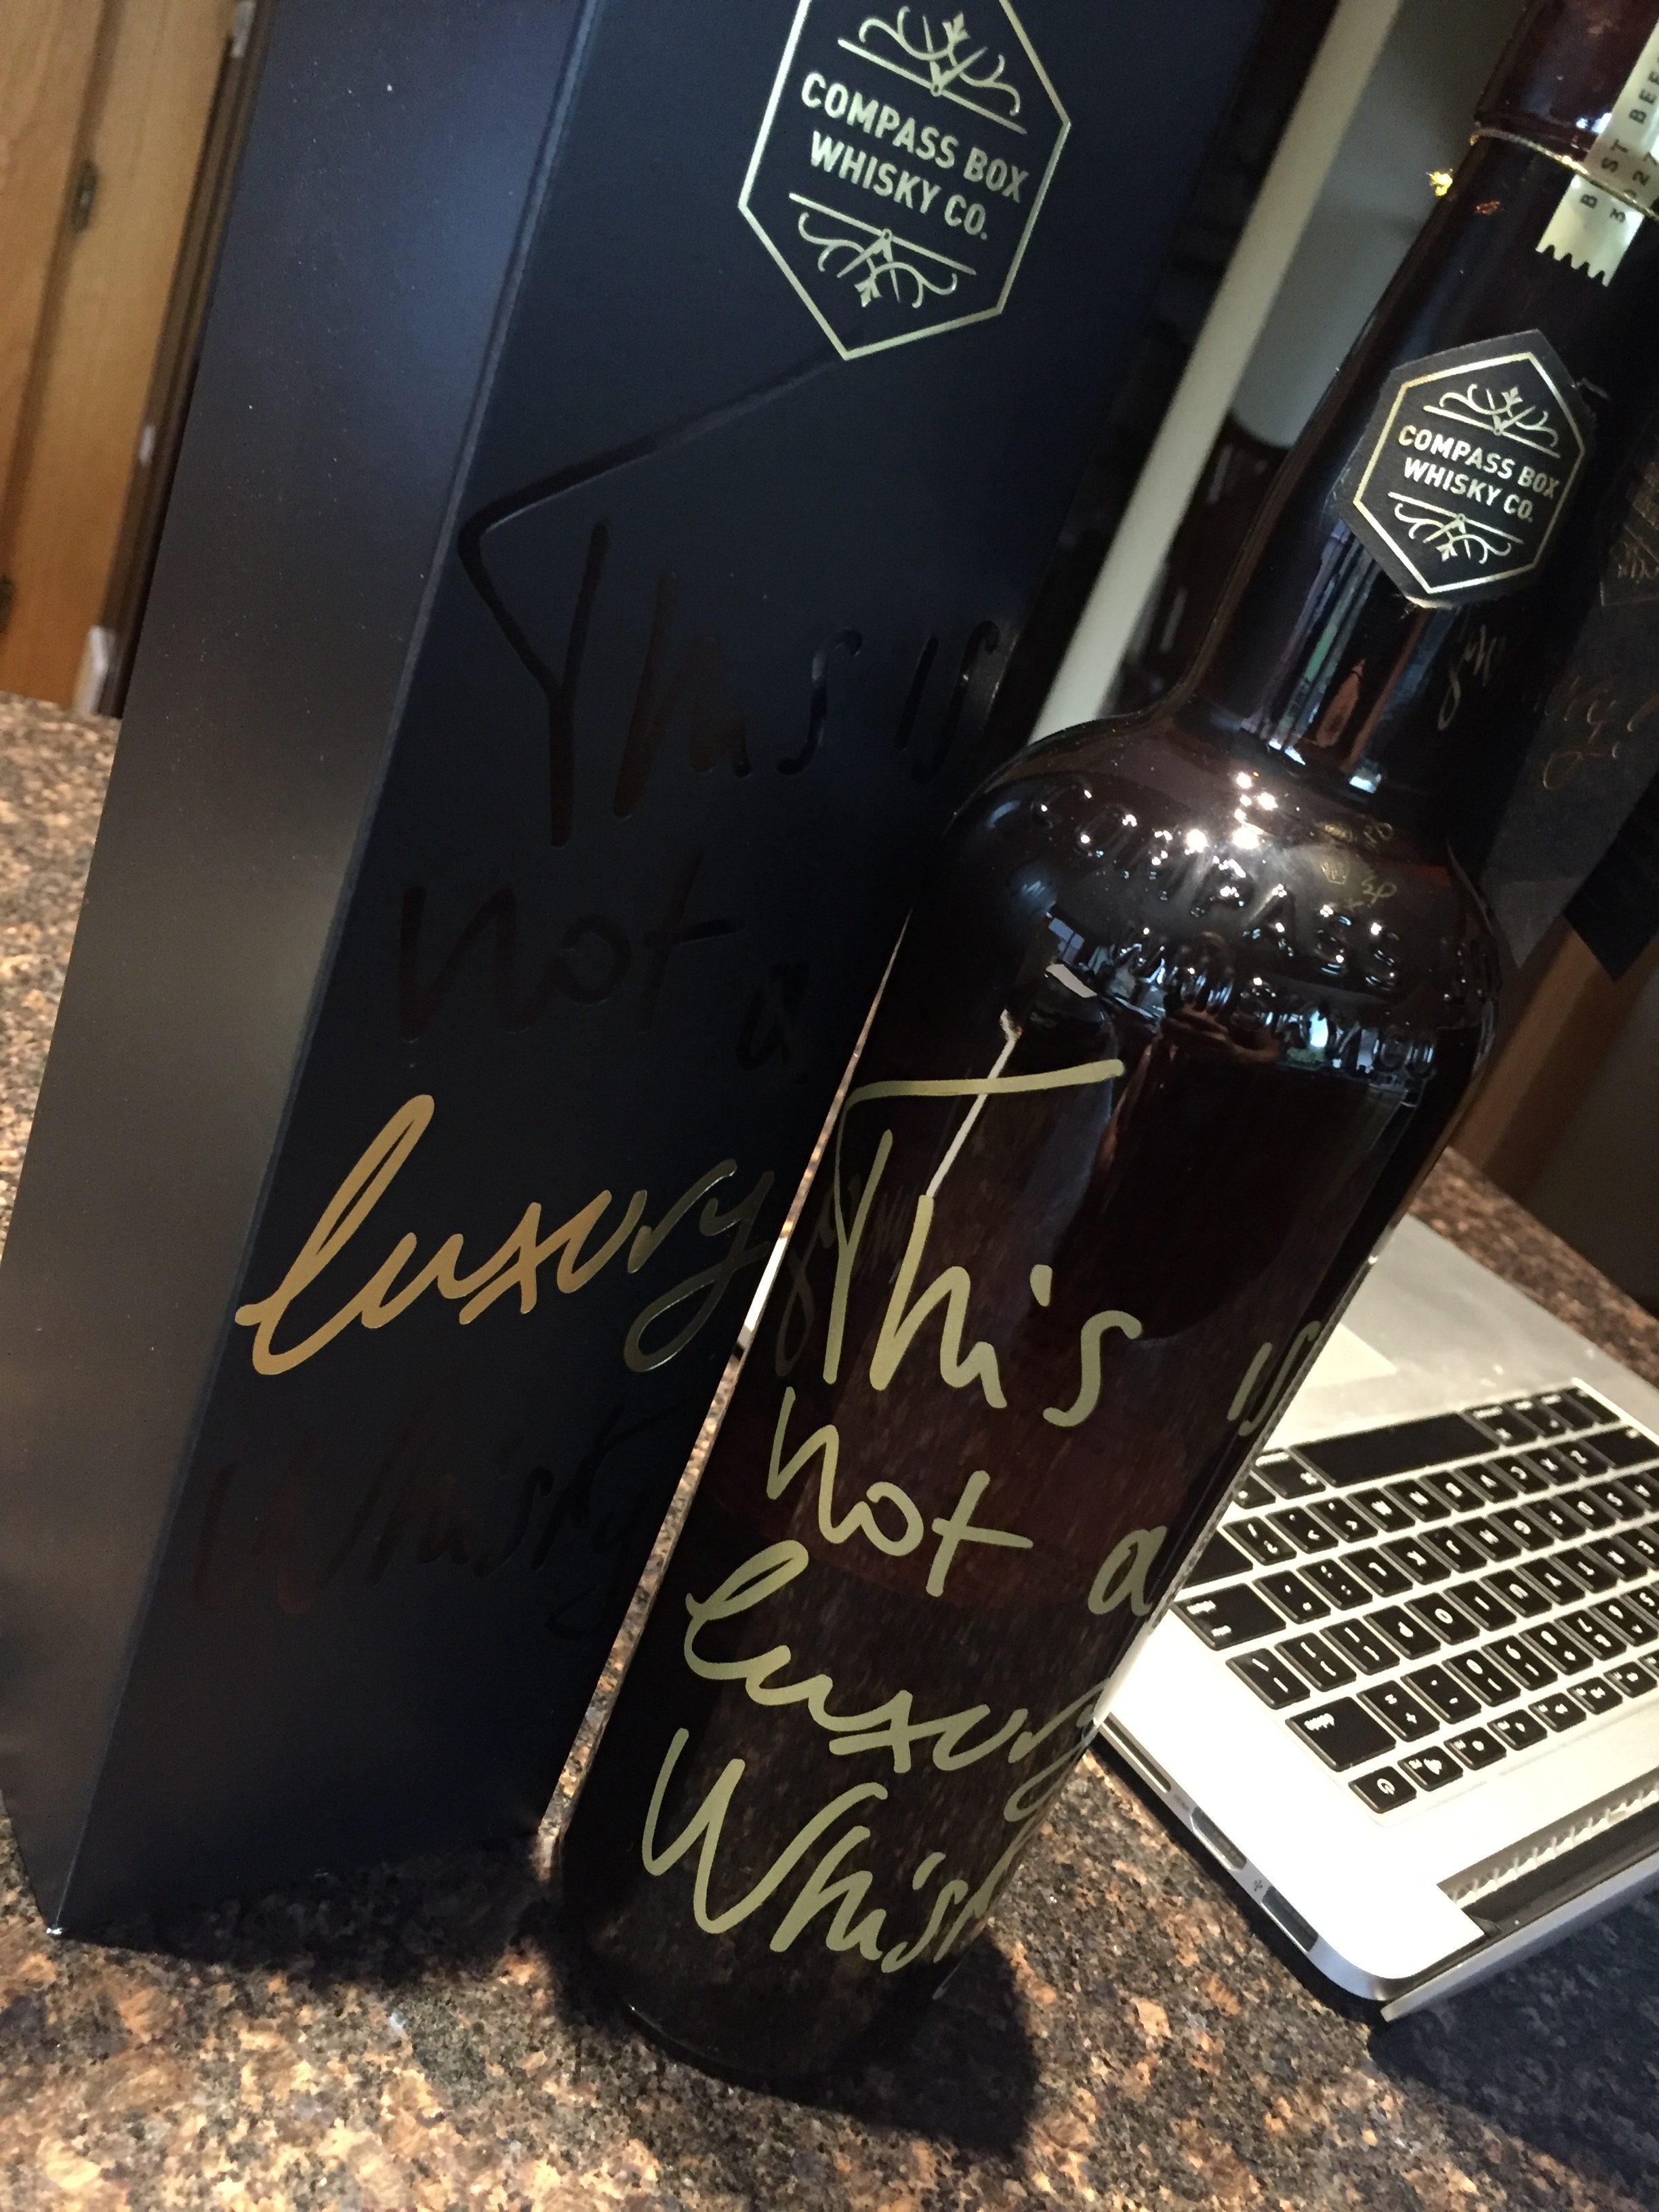 Compass Box This is Not A Luxury Whisky